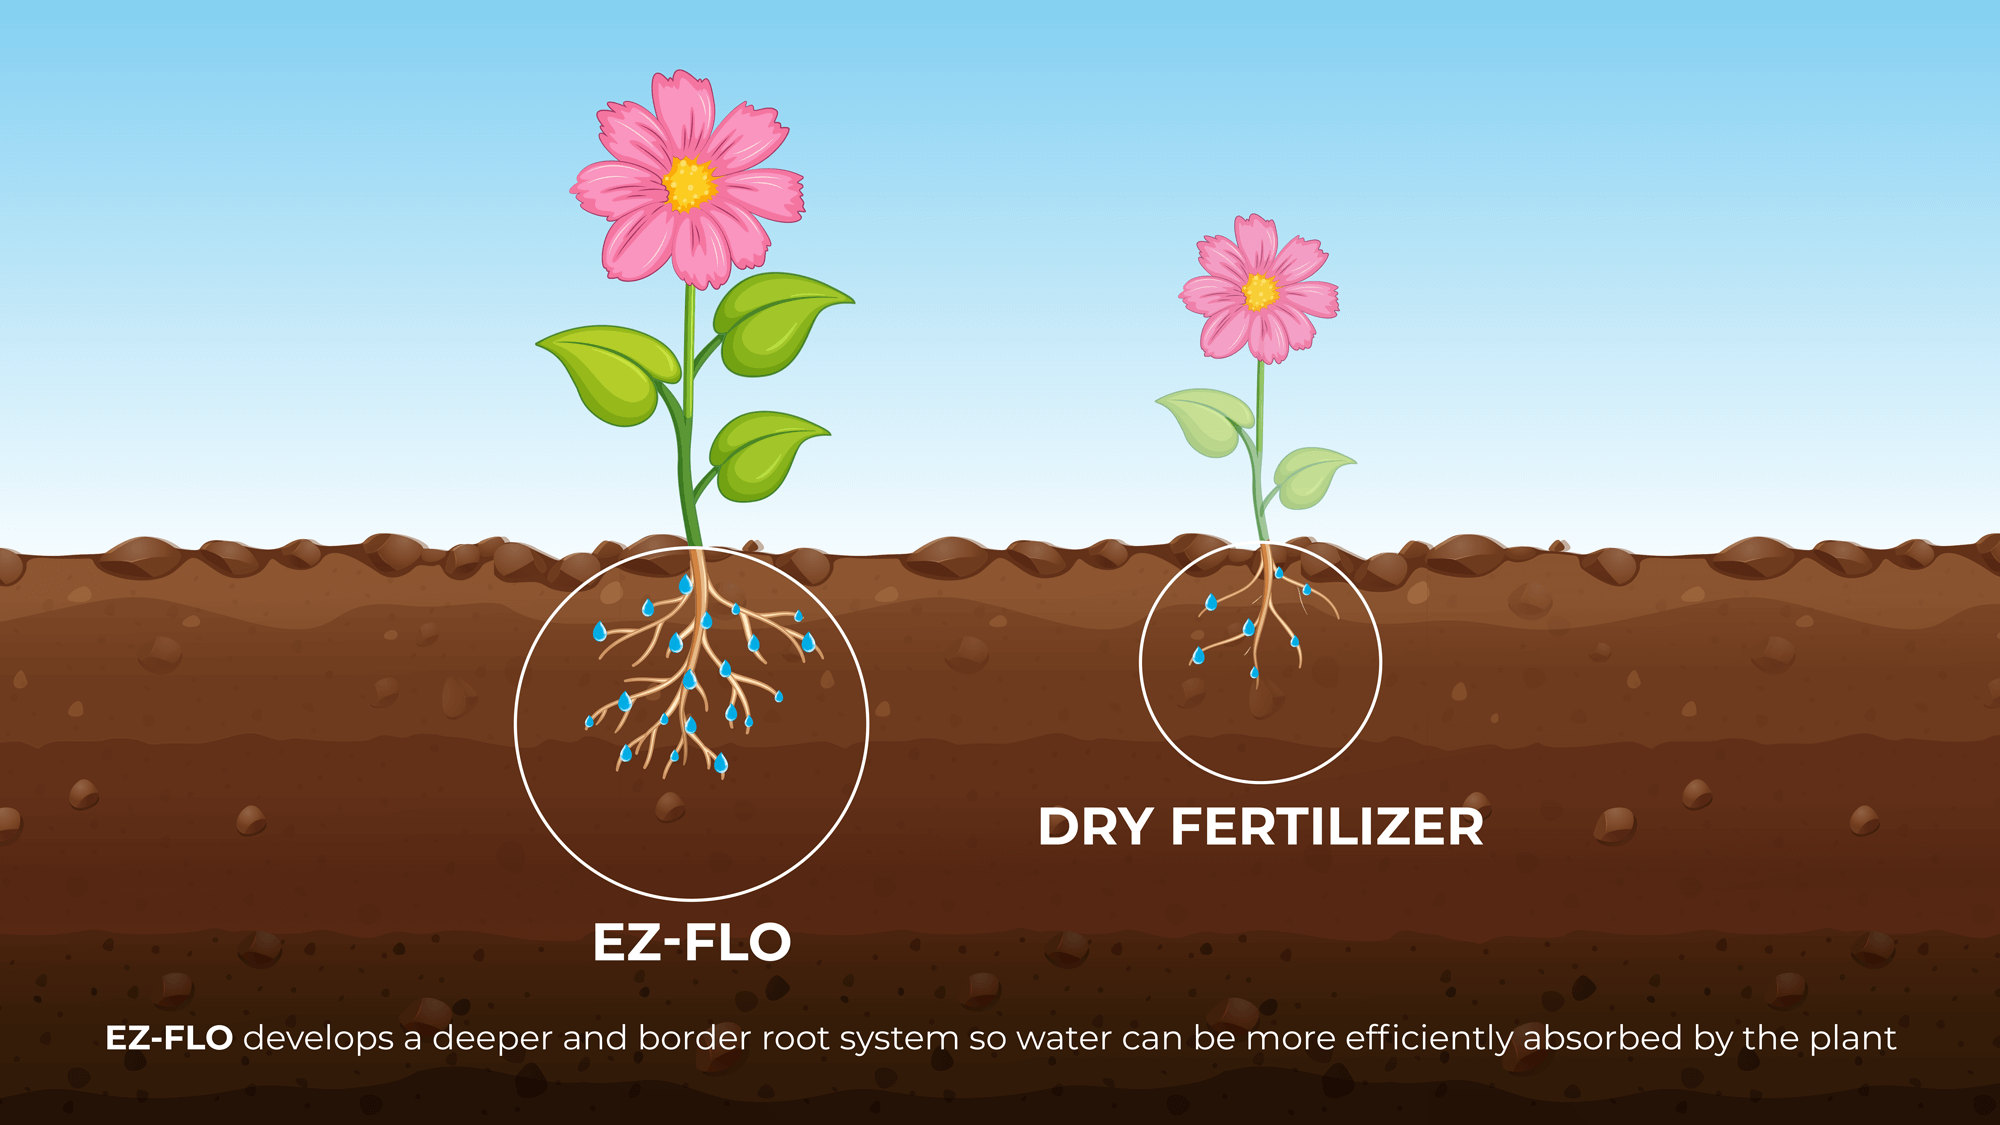 Using EZ FLO plants absorbs water efficiently form soil